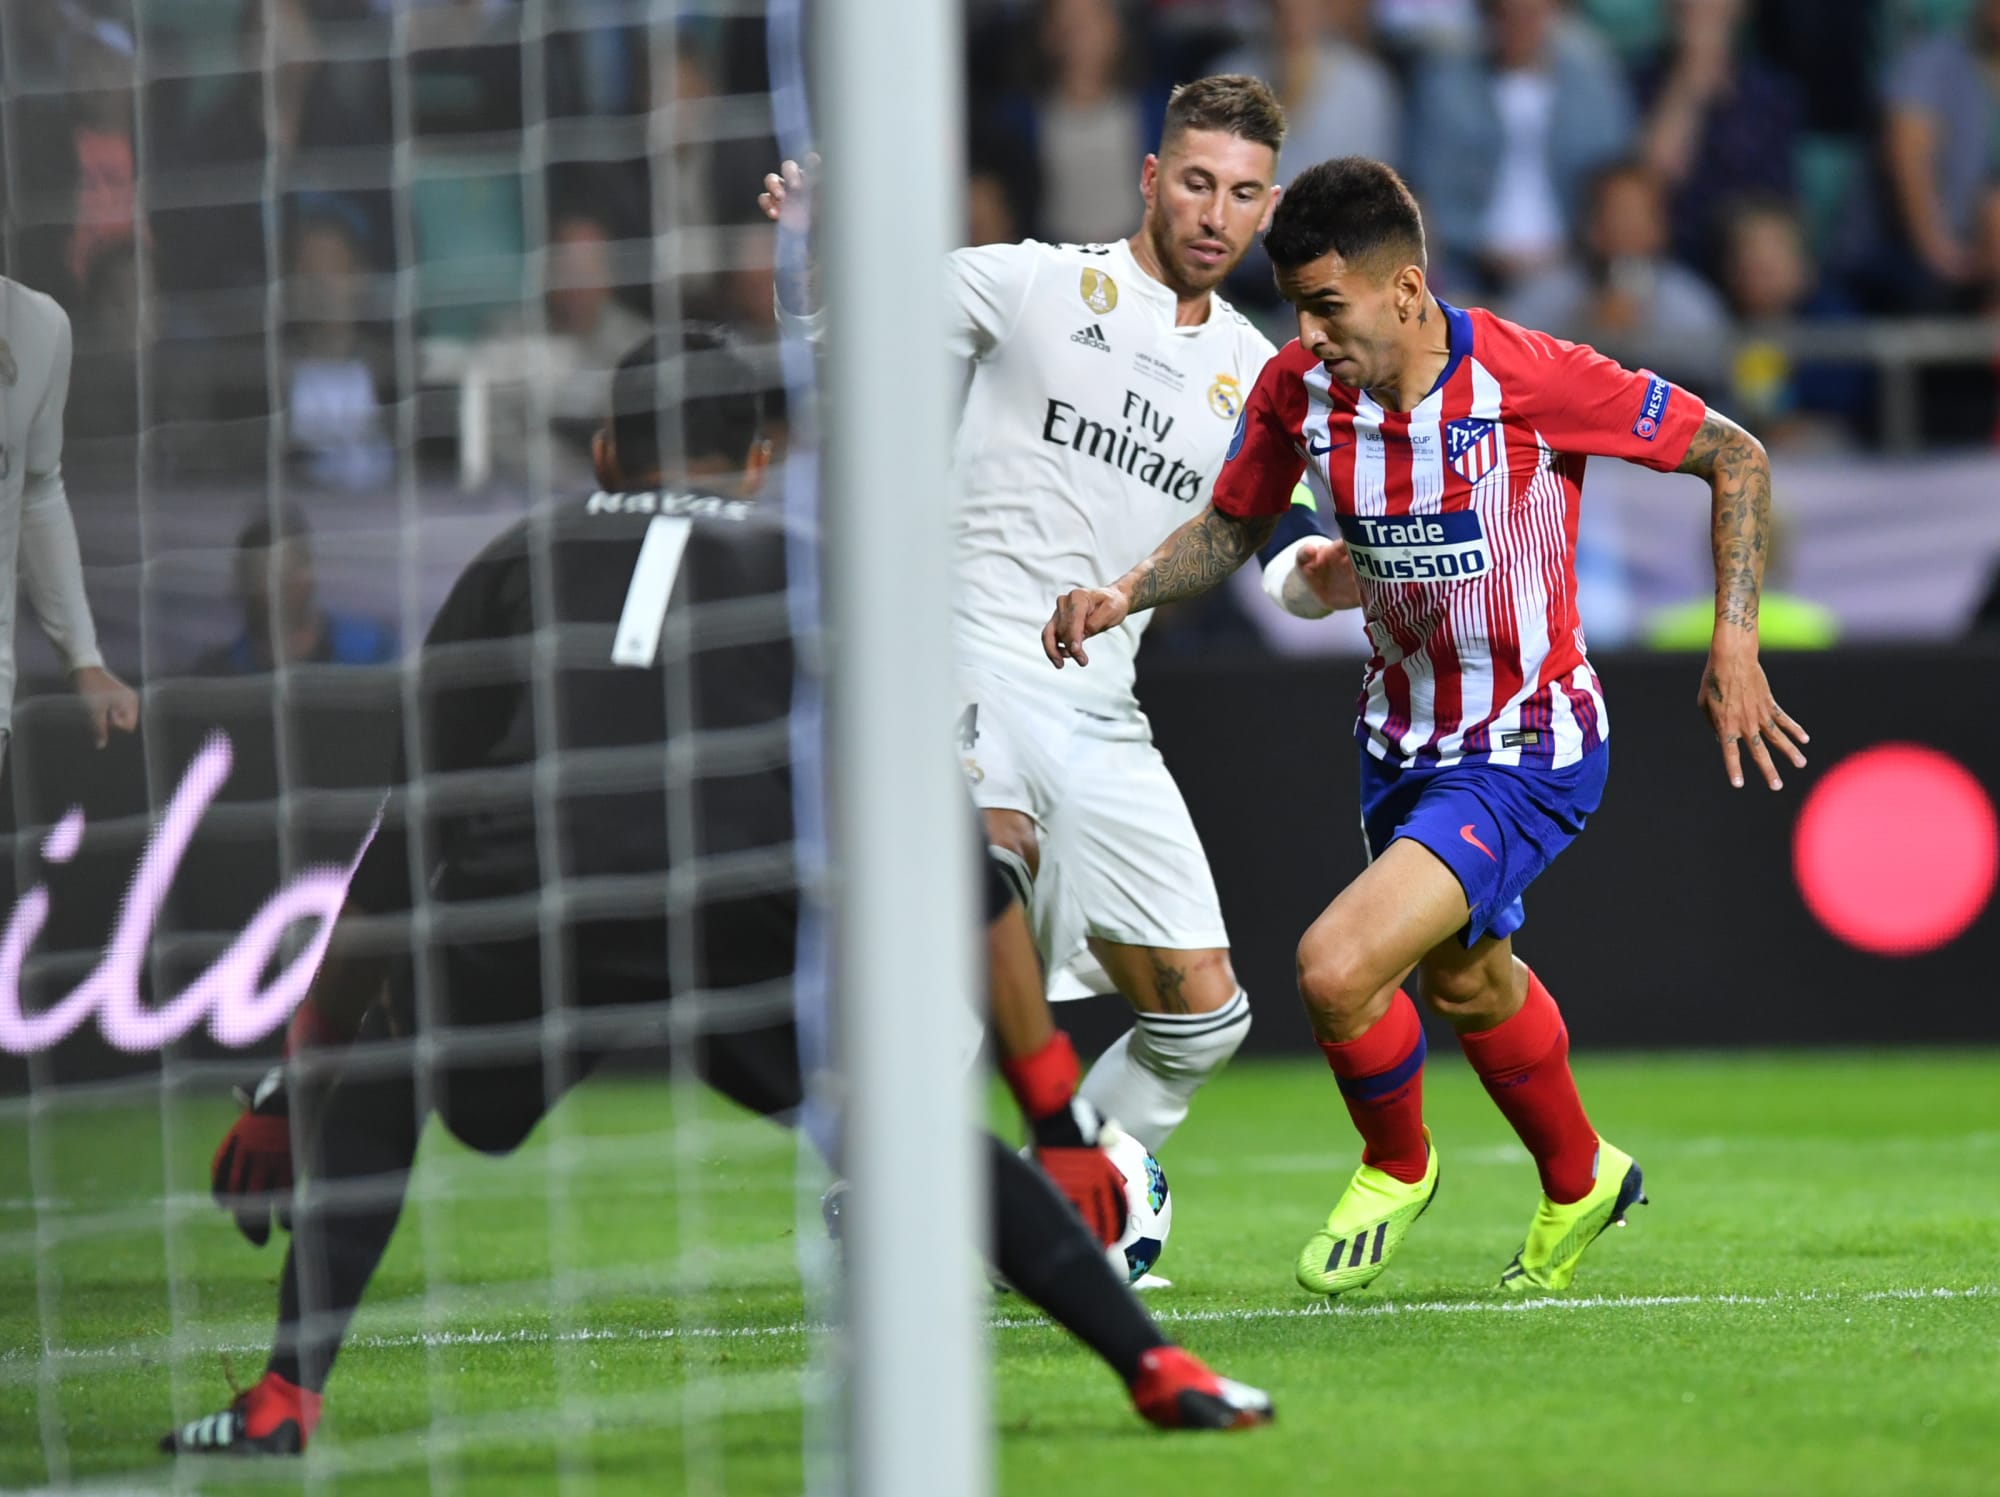 Match Recap: Real Madrid fall to Atletico Madrid in the UEFA Super Cup